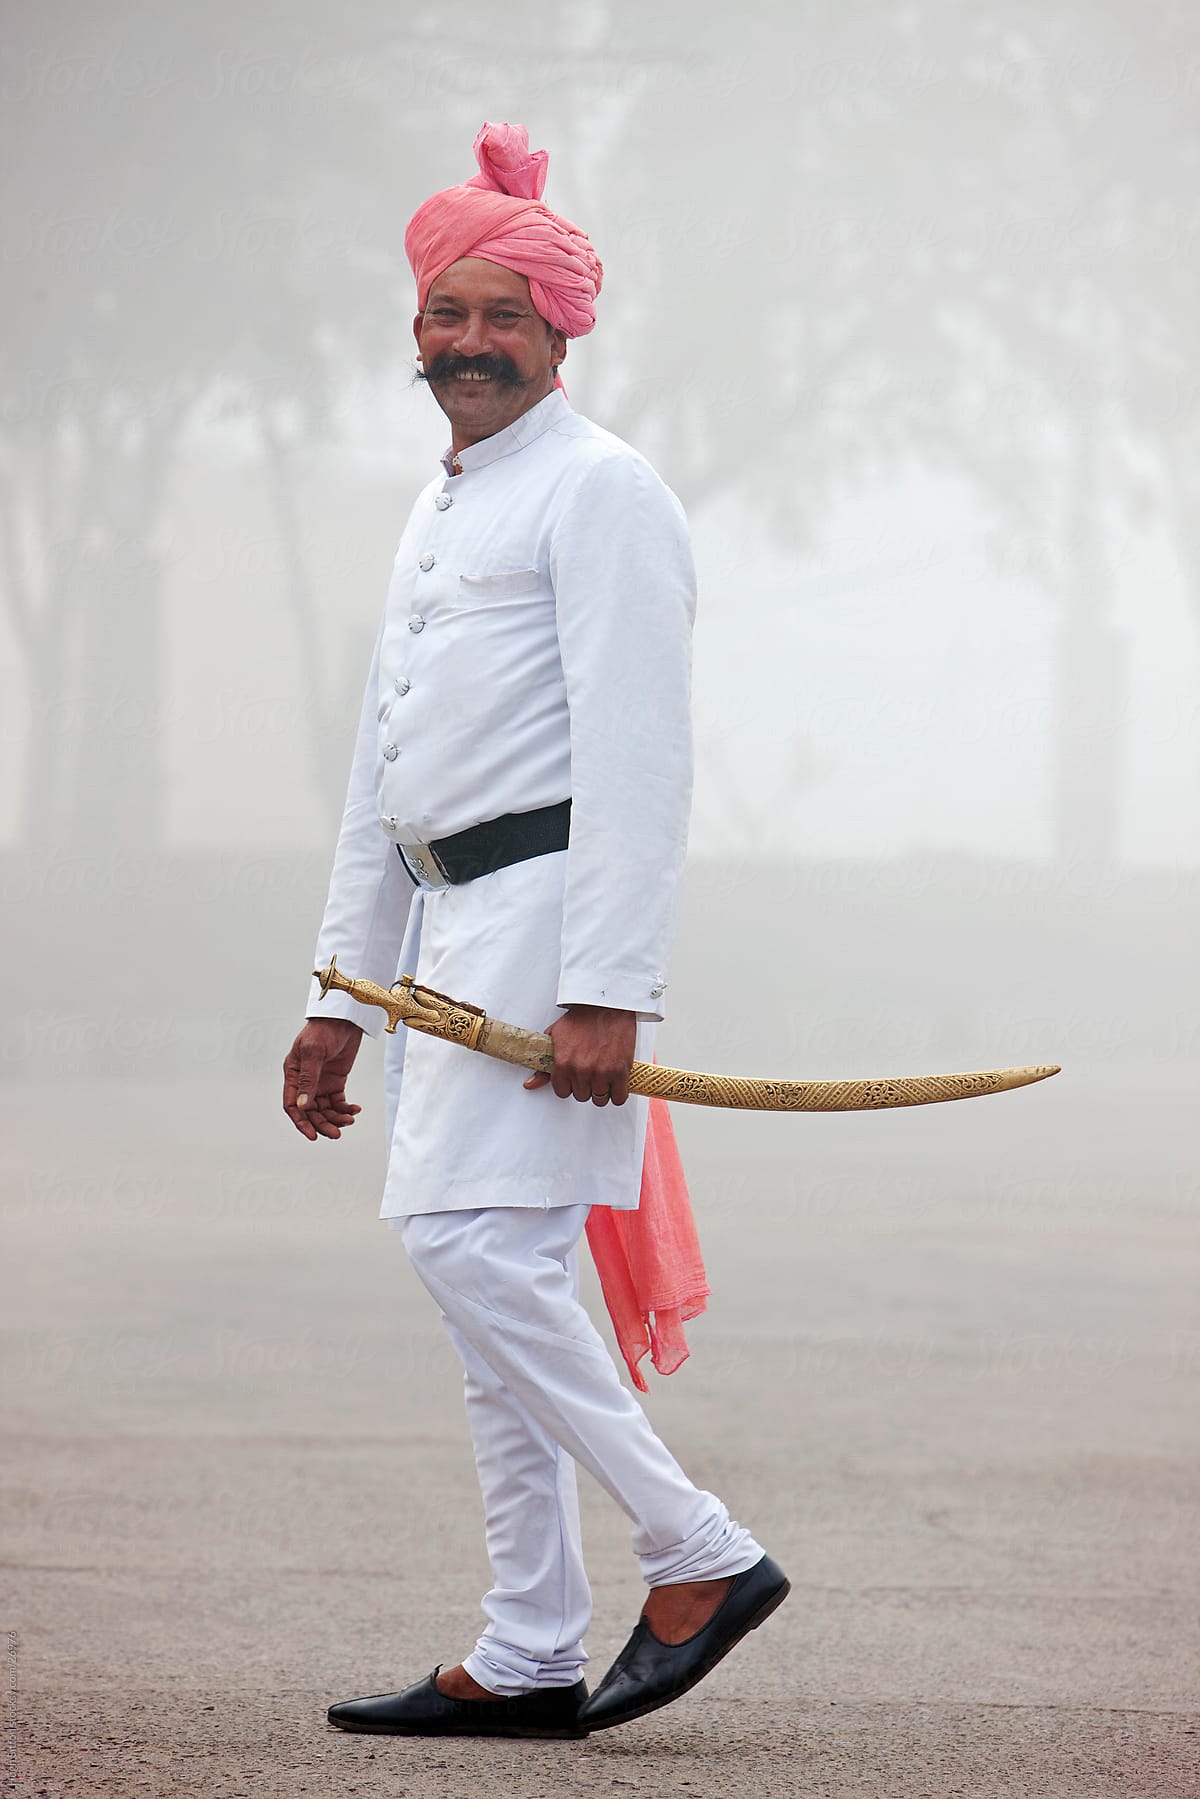 Palace Guard in the early morning mist. Rajasthan.